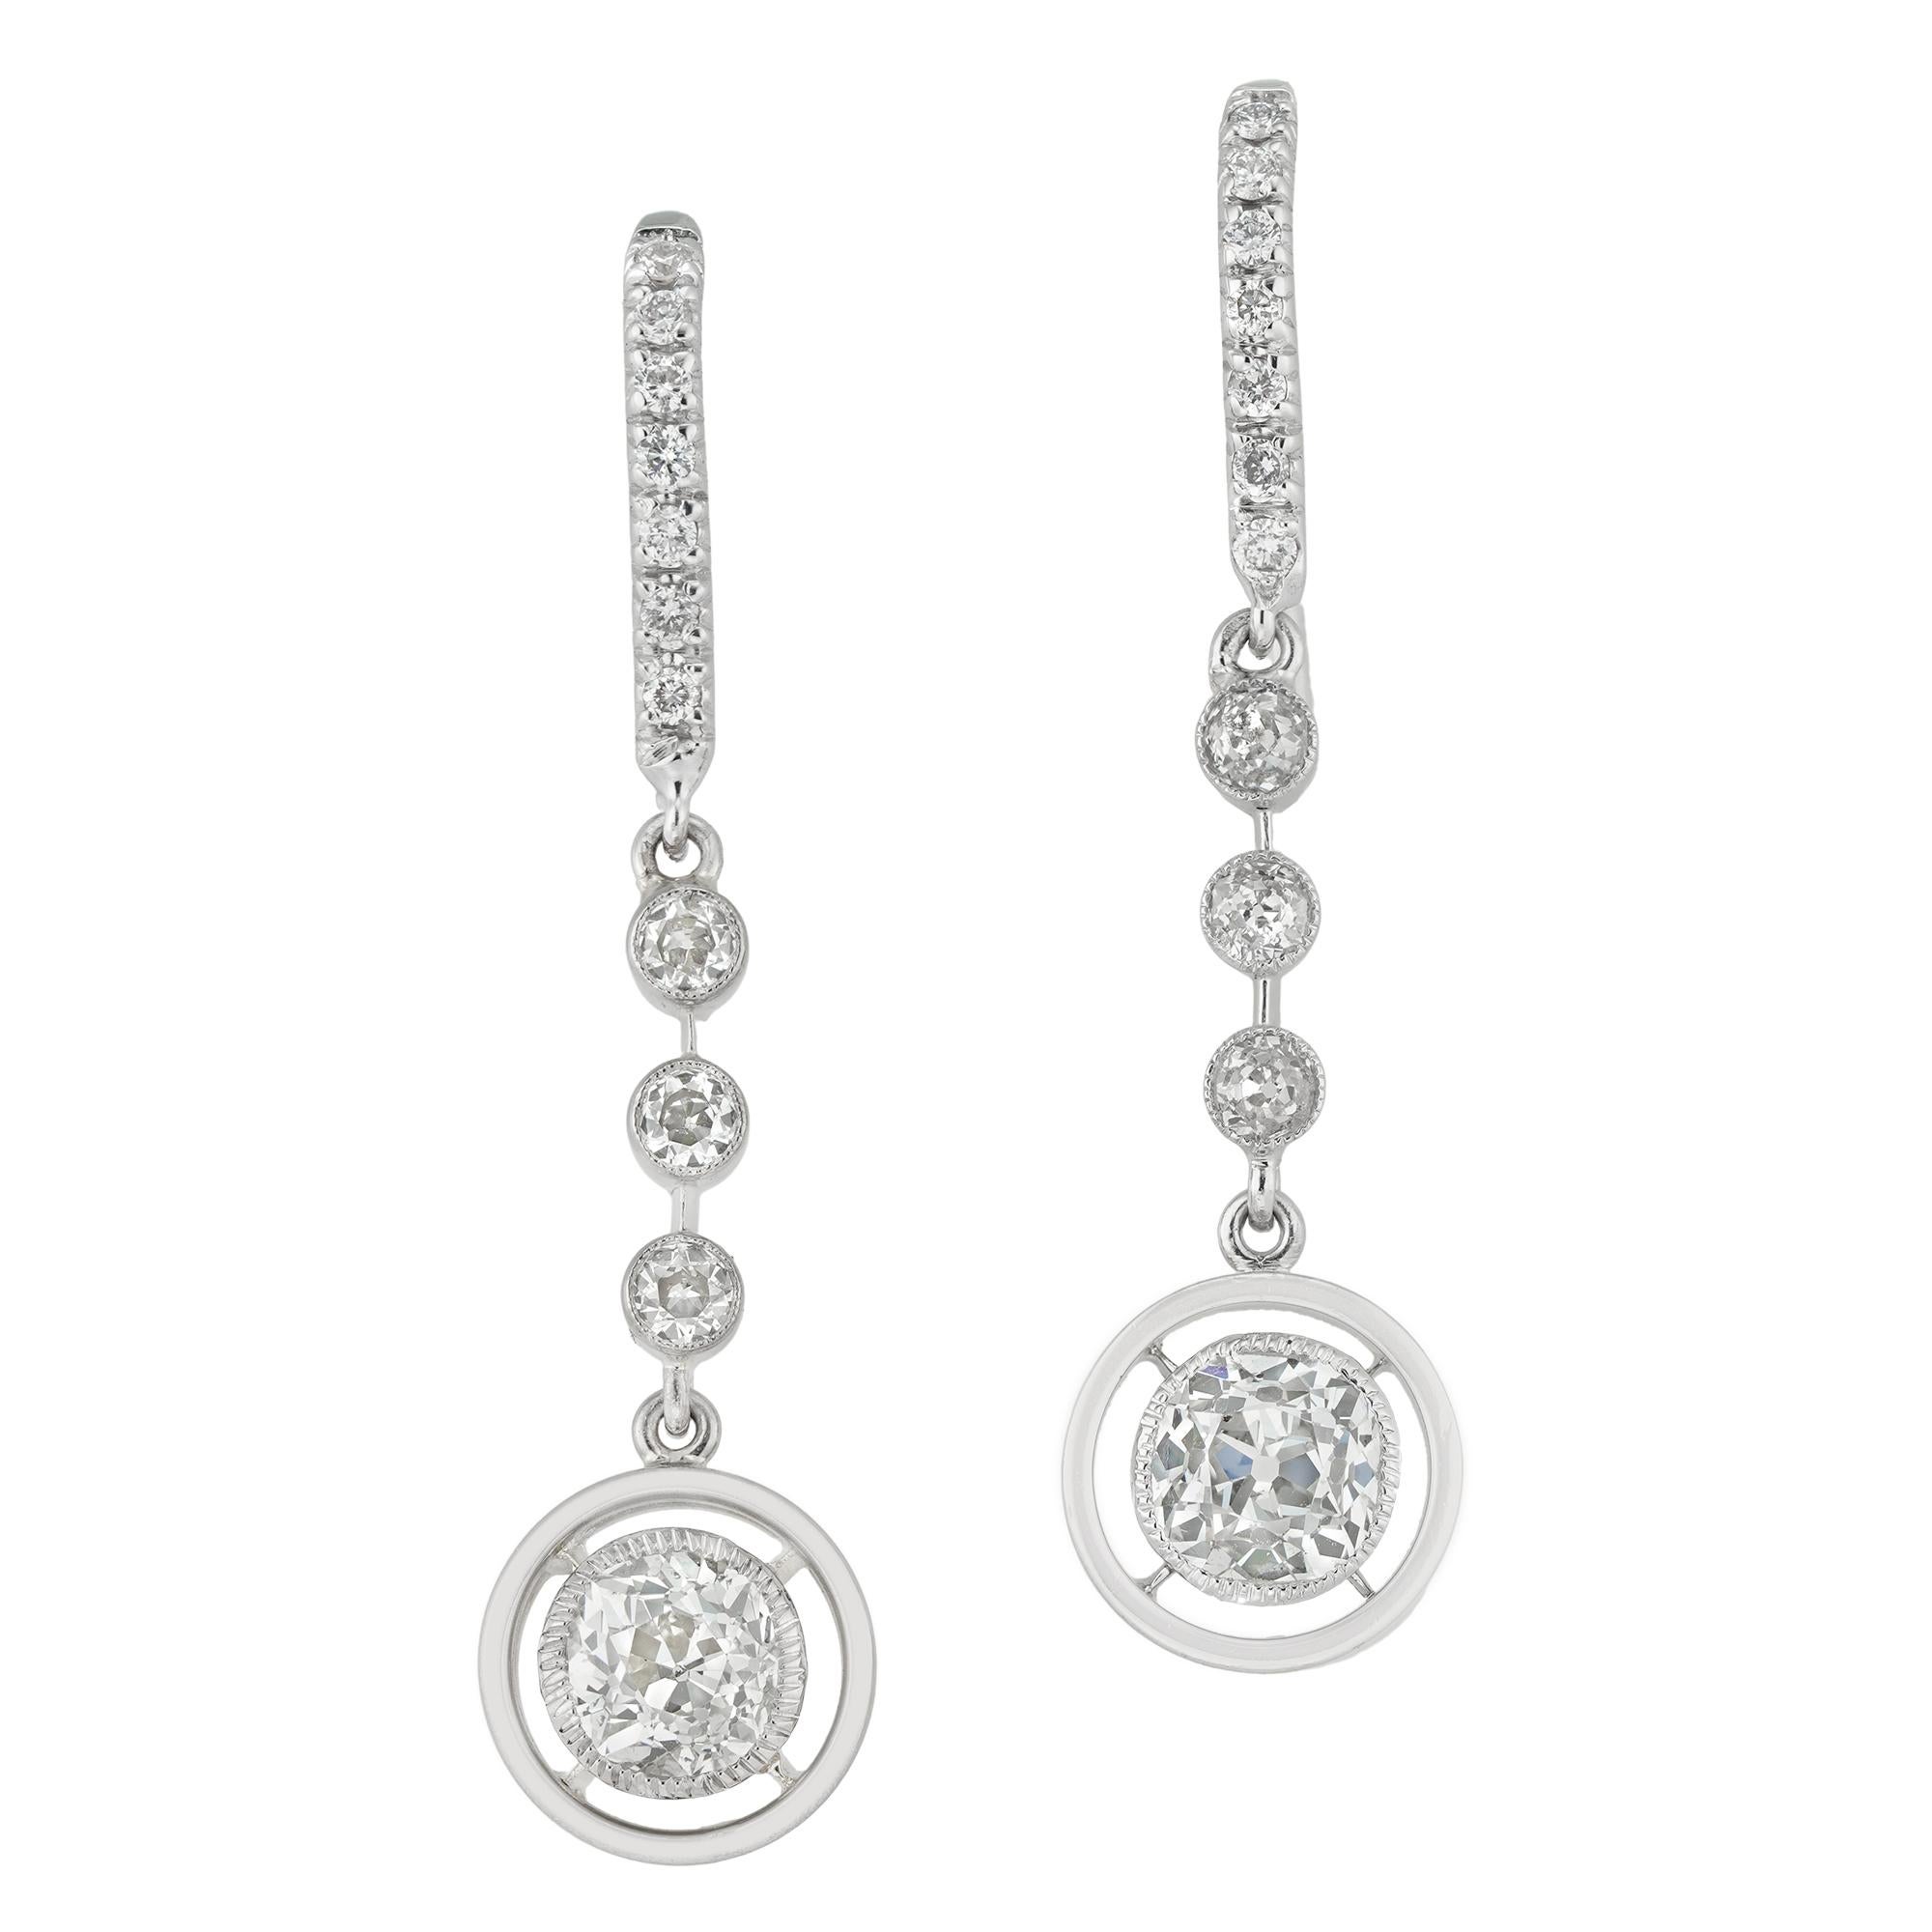 A pair of diamond drop earrings, each earring with an old-cut diamond estimated to weigh 0.65 carats milligram-set in platinum collet and surrounded by a circular frame with day-light in between, suspended by a run of three small old-cut diamonds